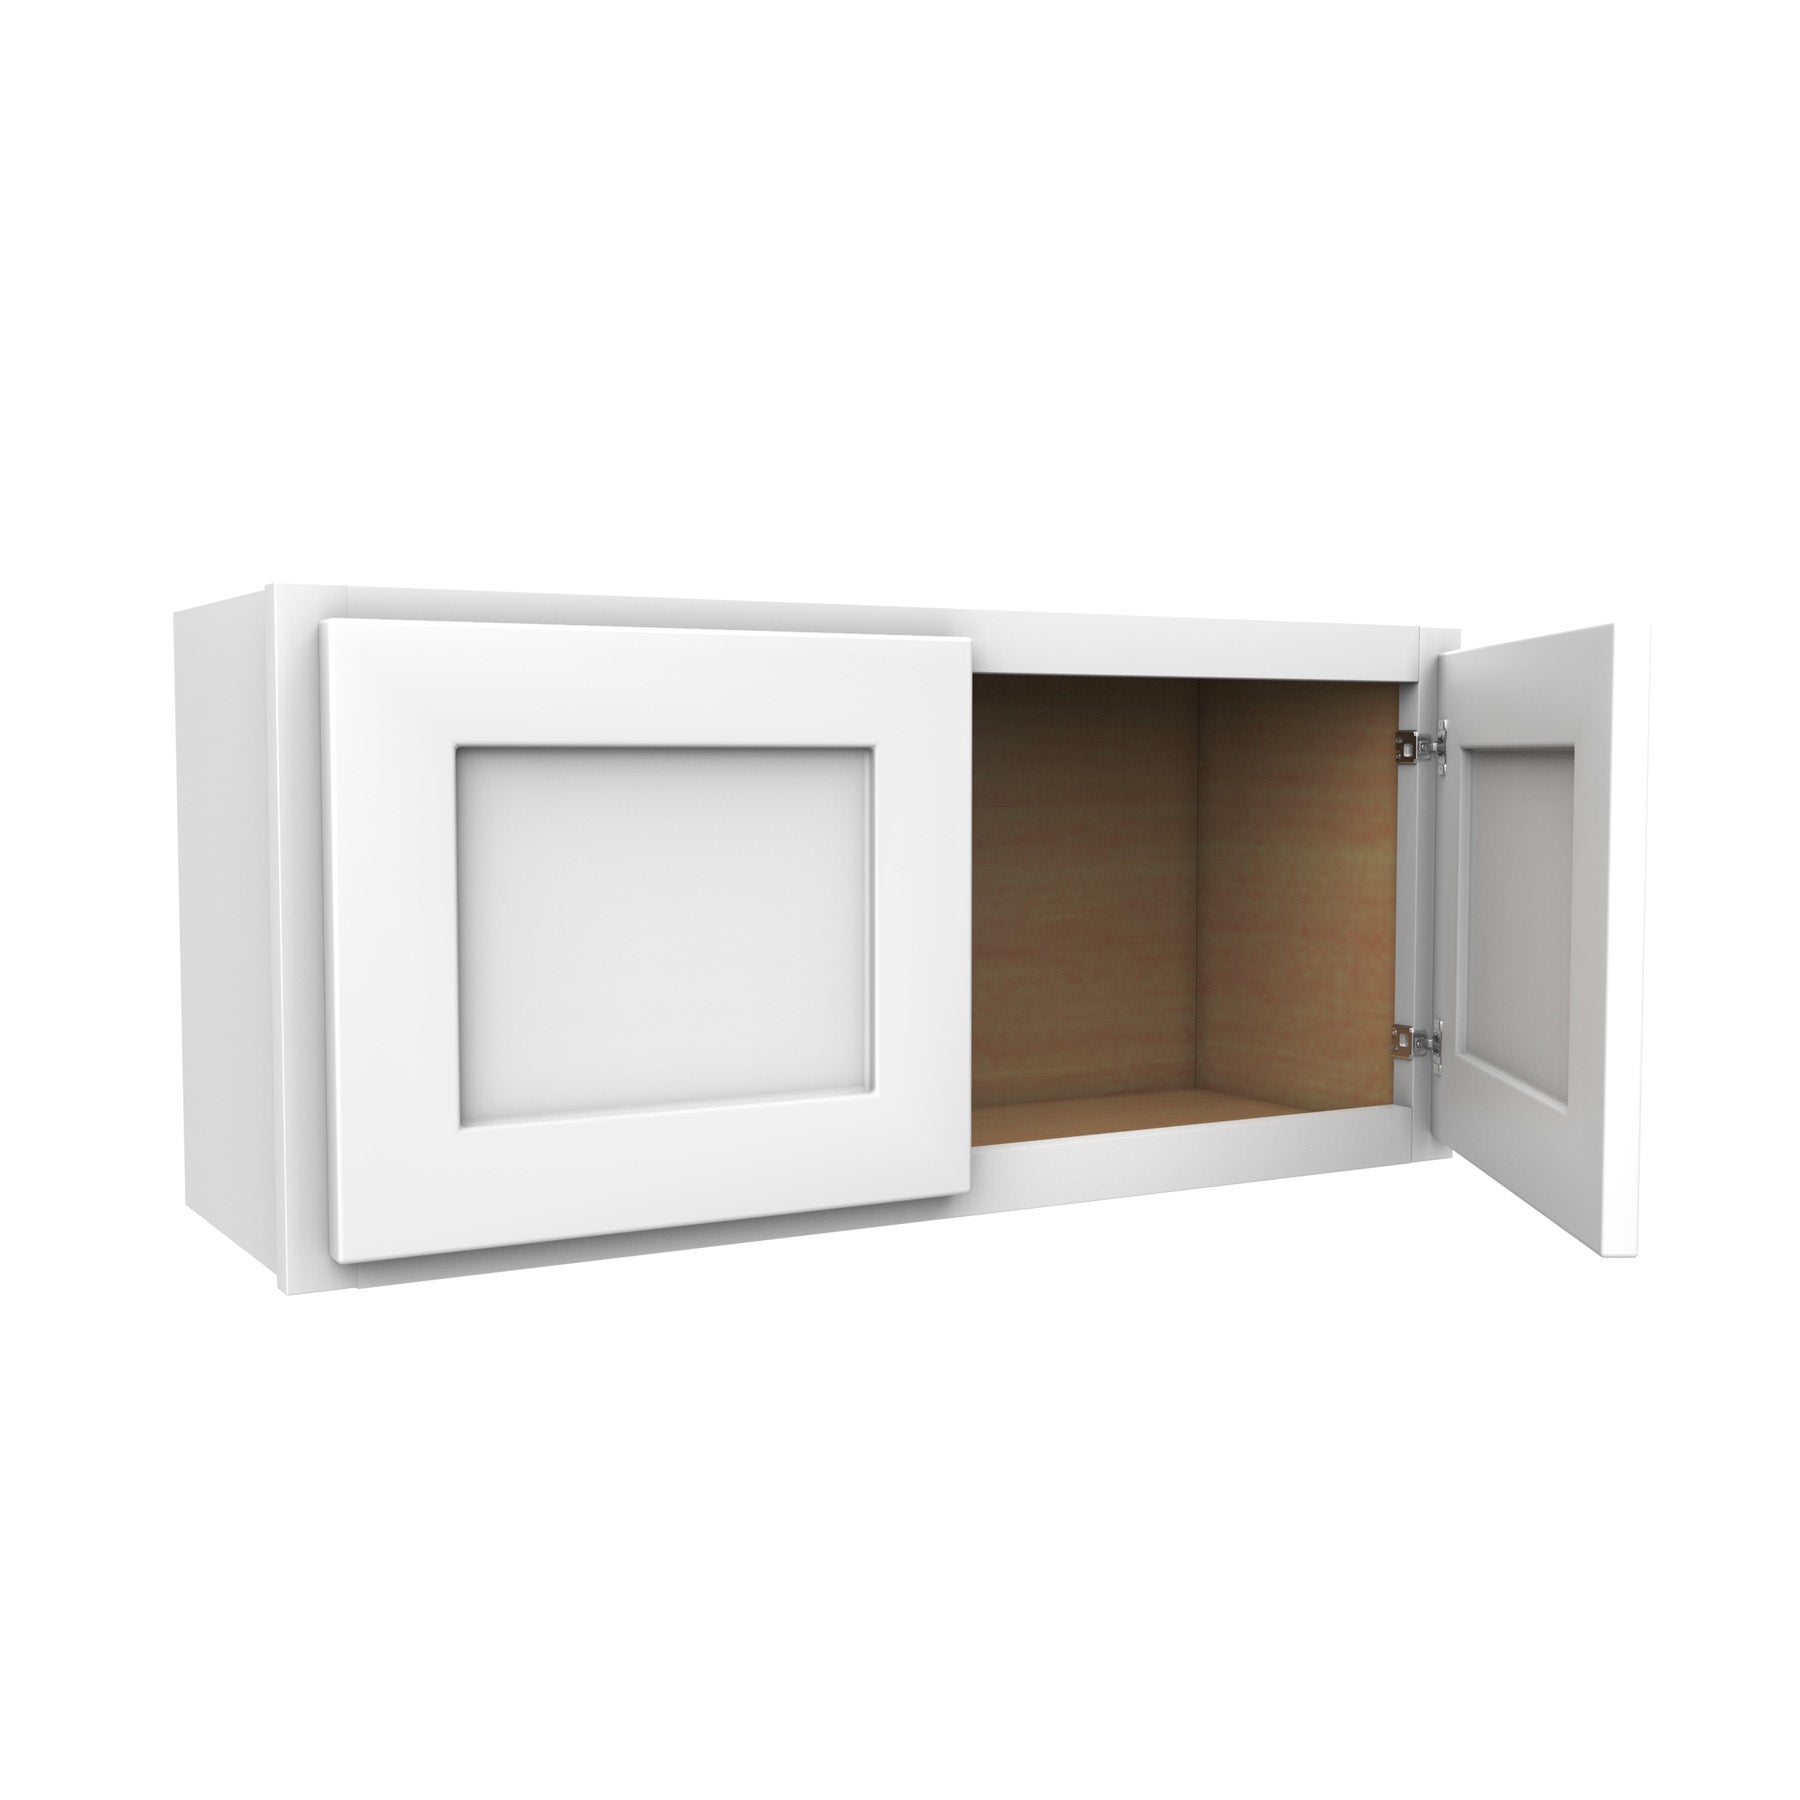 Luxor White - Double Door Wall Cabinet | 33"W x 15"H x 12"D